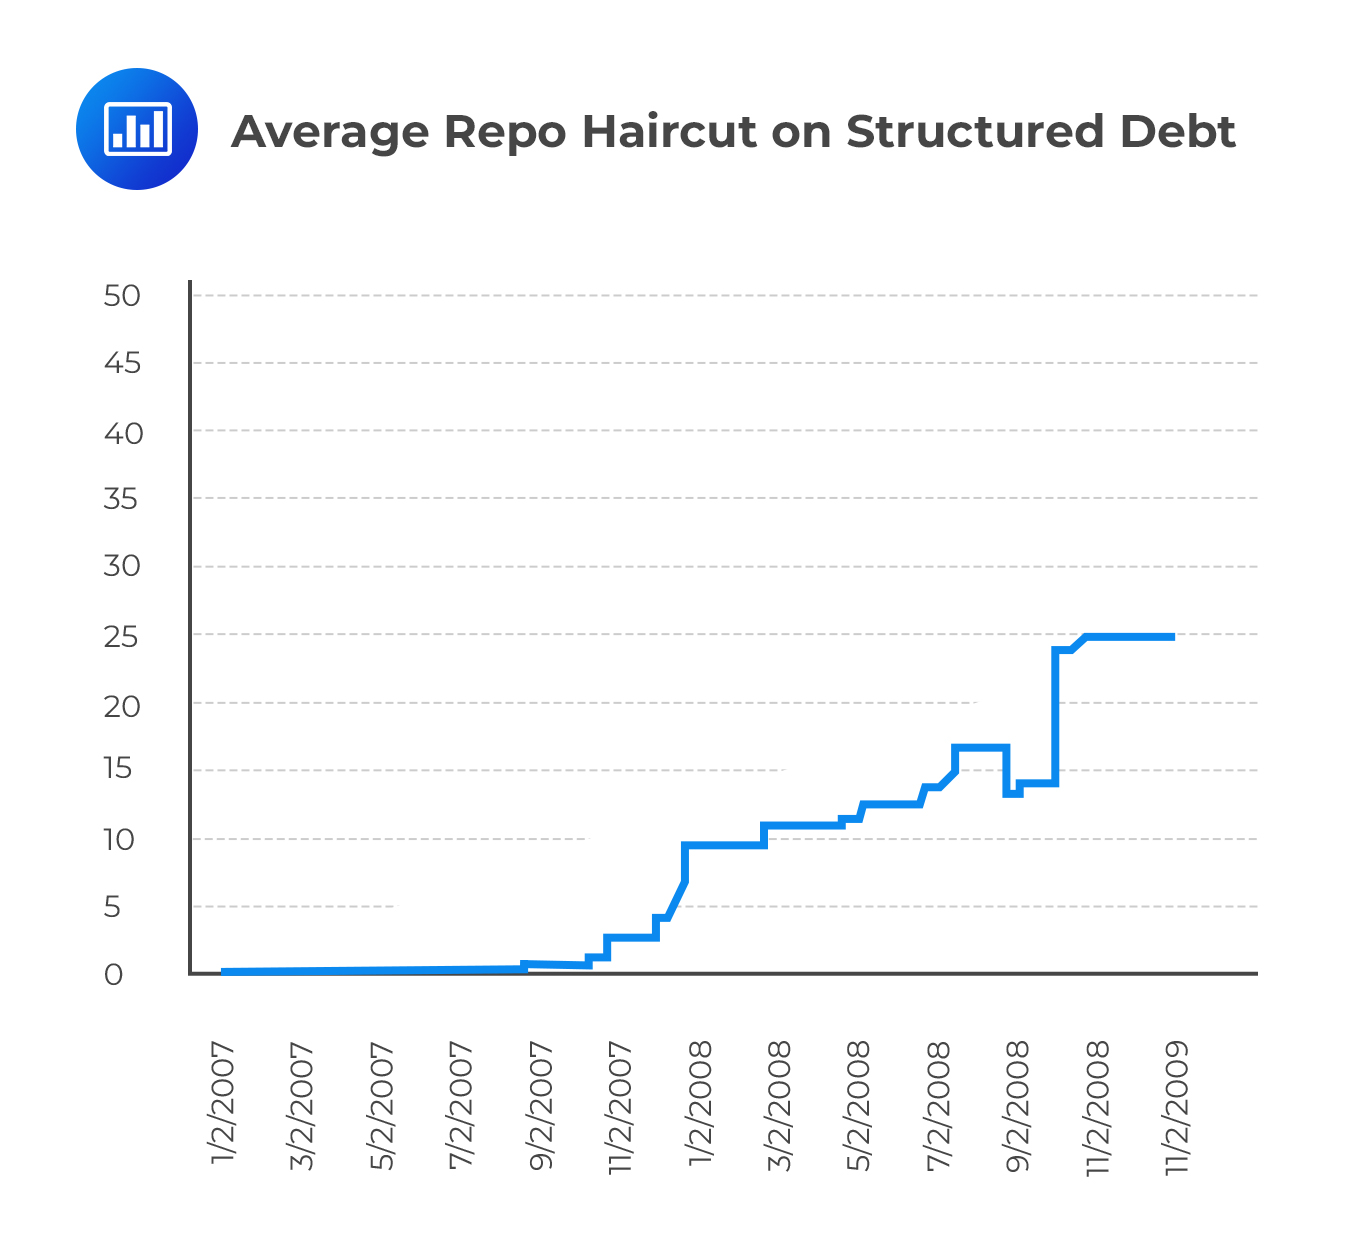 Average Repo Haircut on Structured Debt